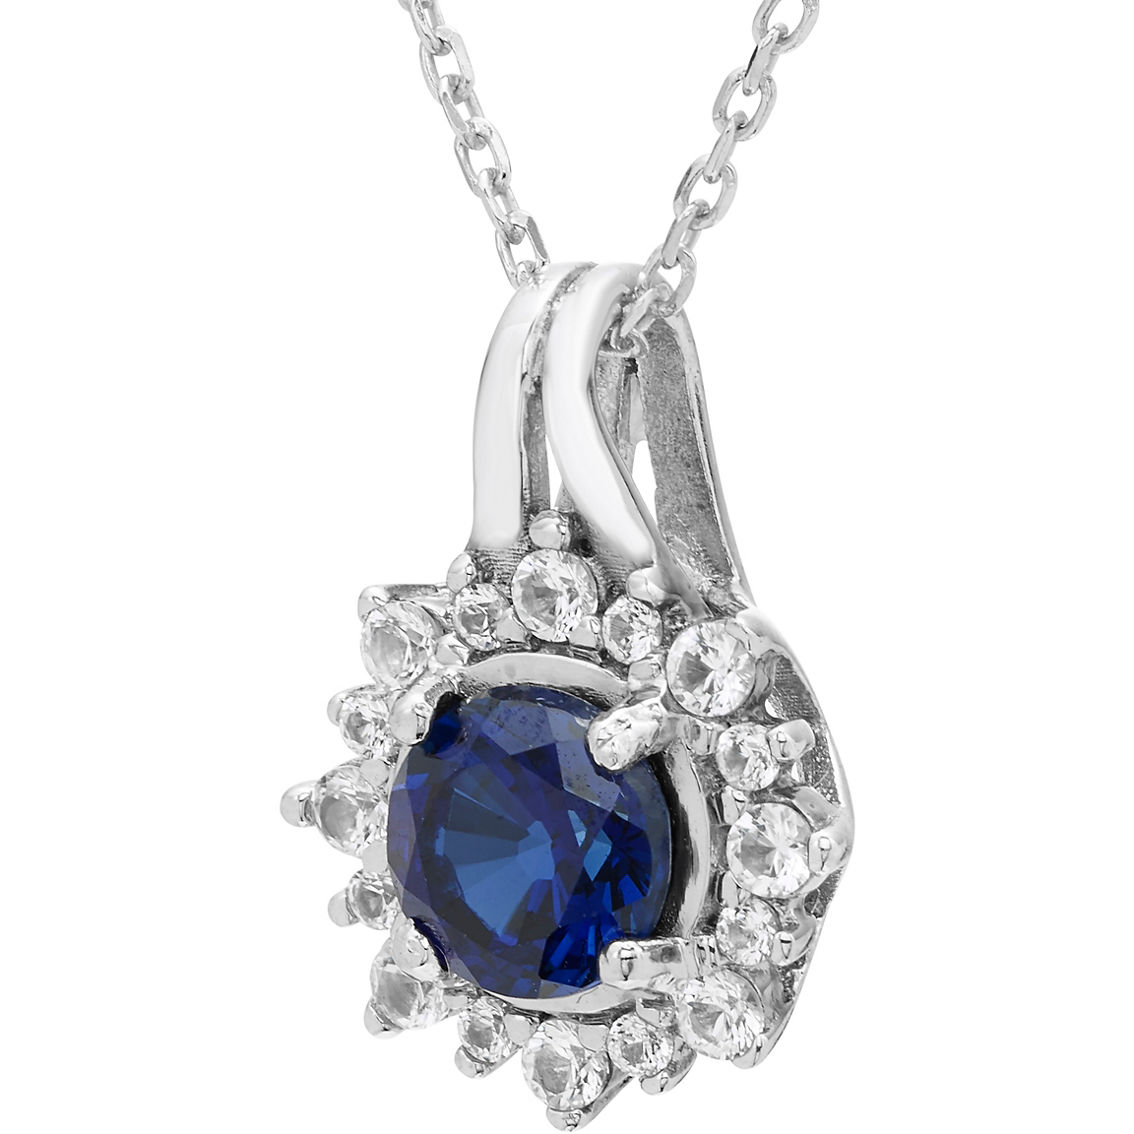 Sterling Silver Lab Created Blue and White Sapphire Pendant and Stud Earrings Set - Image 2 of 4